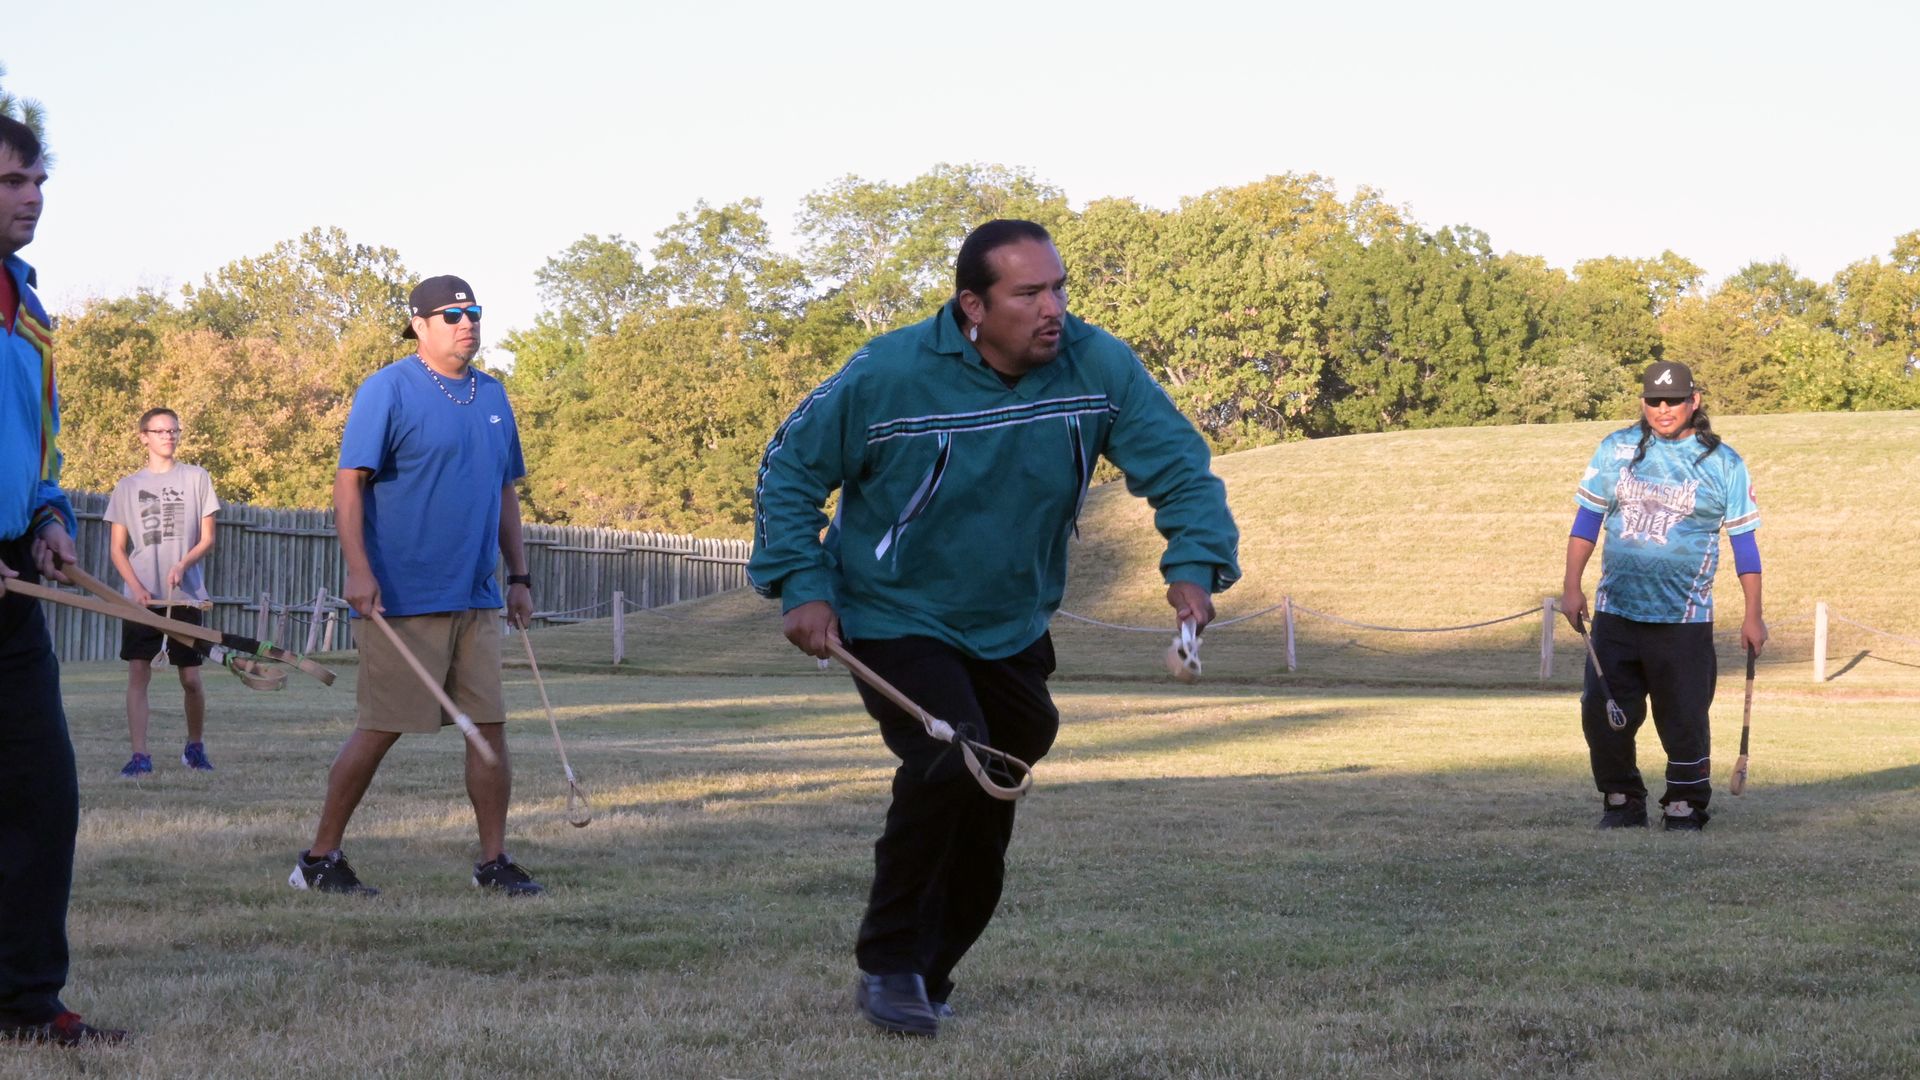 A man runs while carrying toli sticks used in the traditional native game of stickball